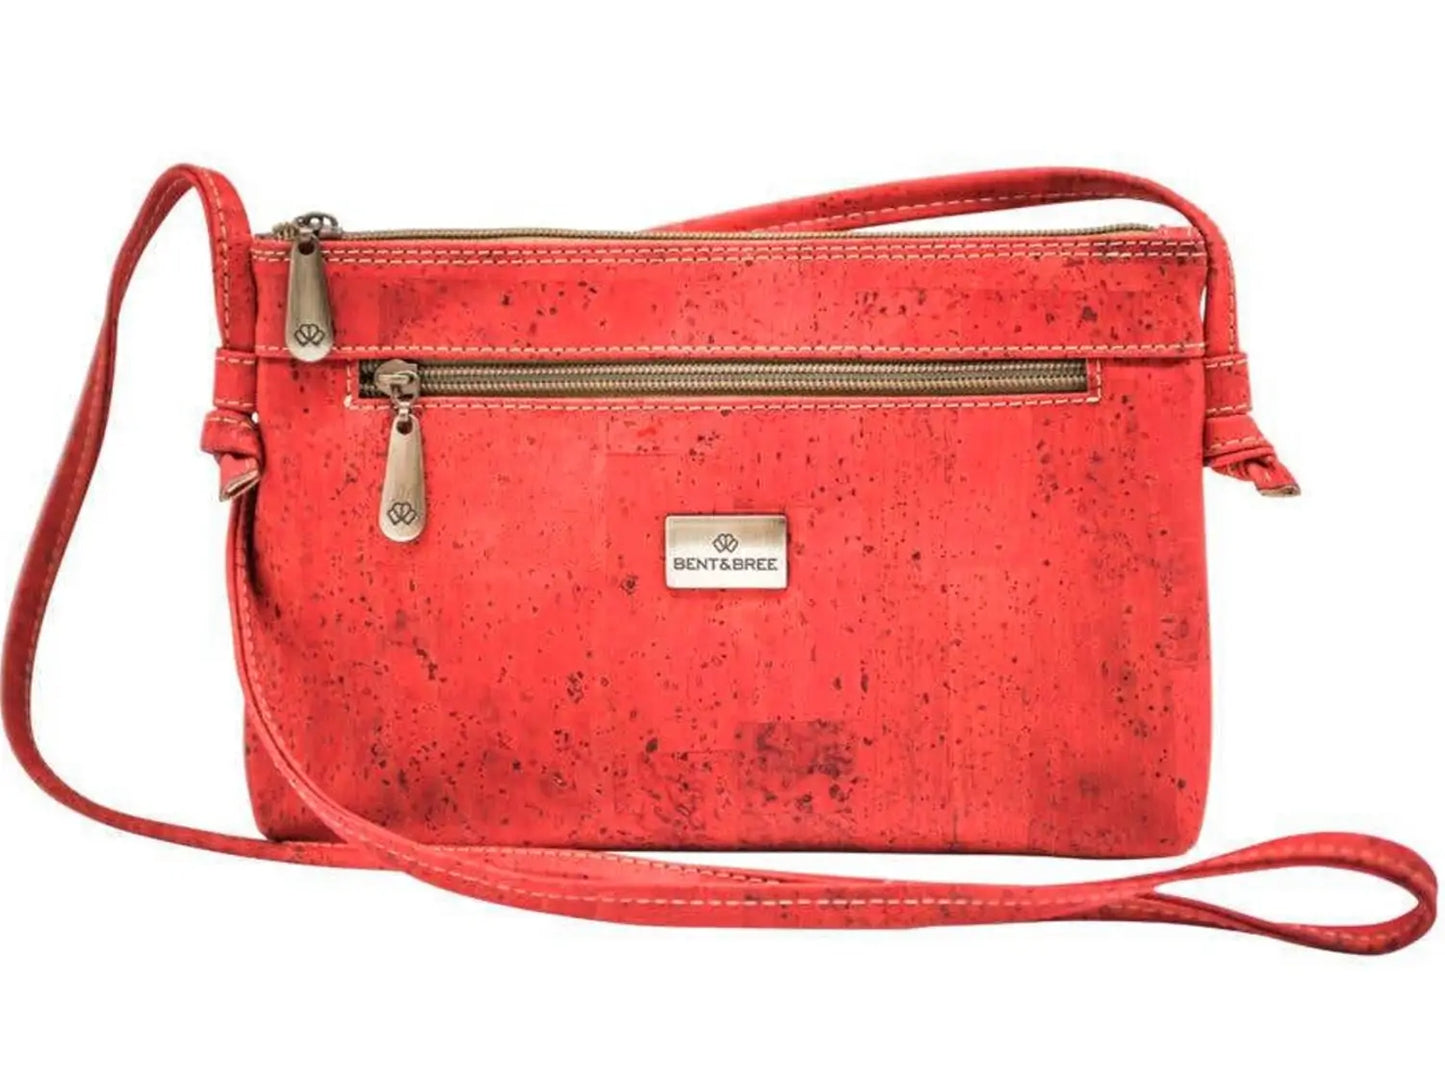 Red crossbody bag made of cork material with gold metal zippers pockets